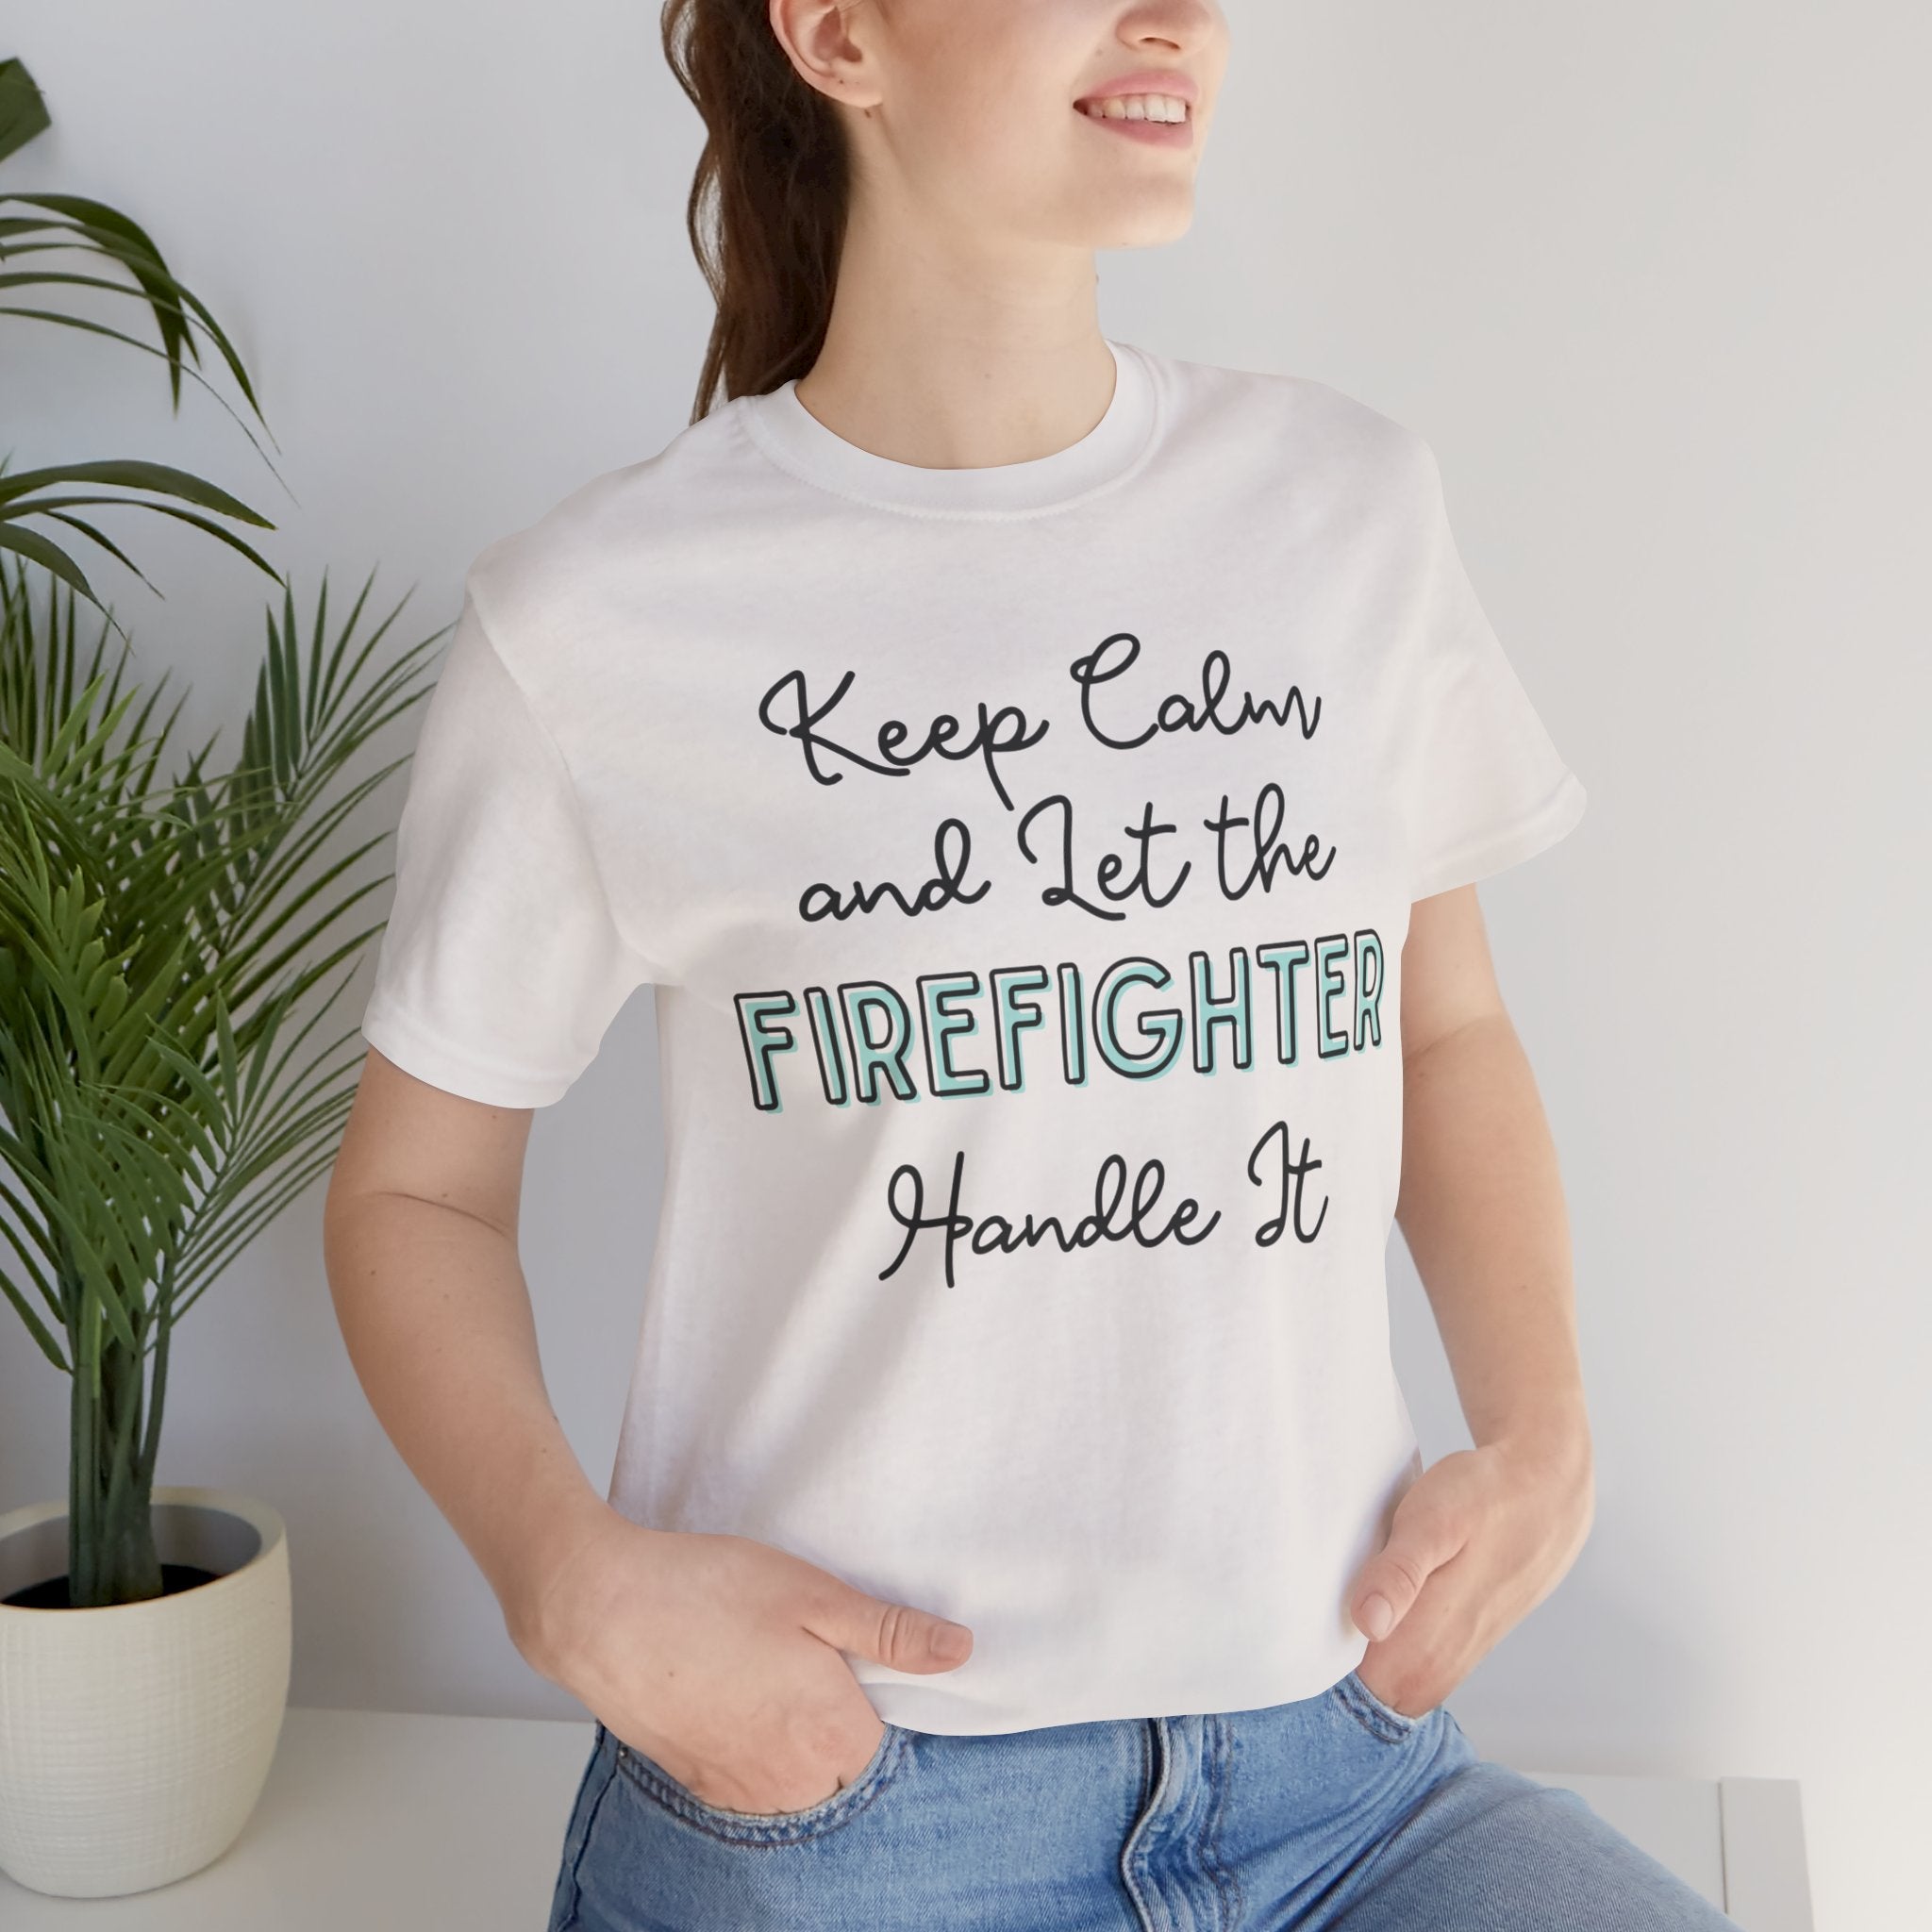 Keep Calm and let the Firefighter handle It - Jersey Short Sleeve Tee